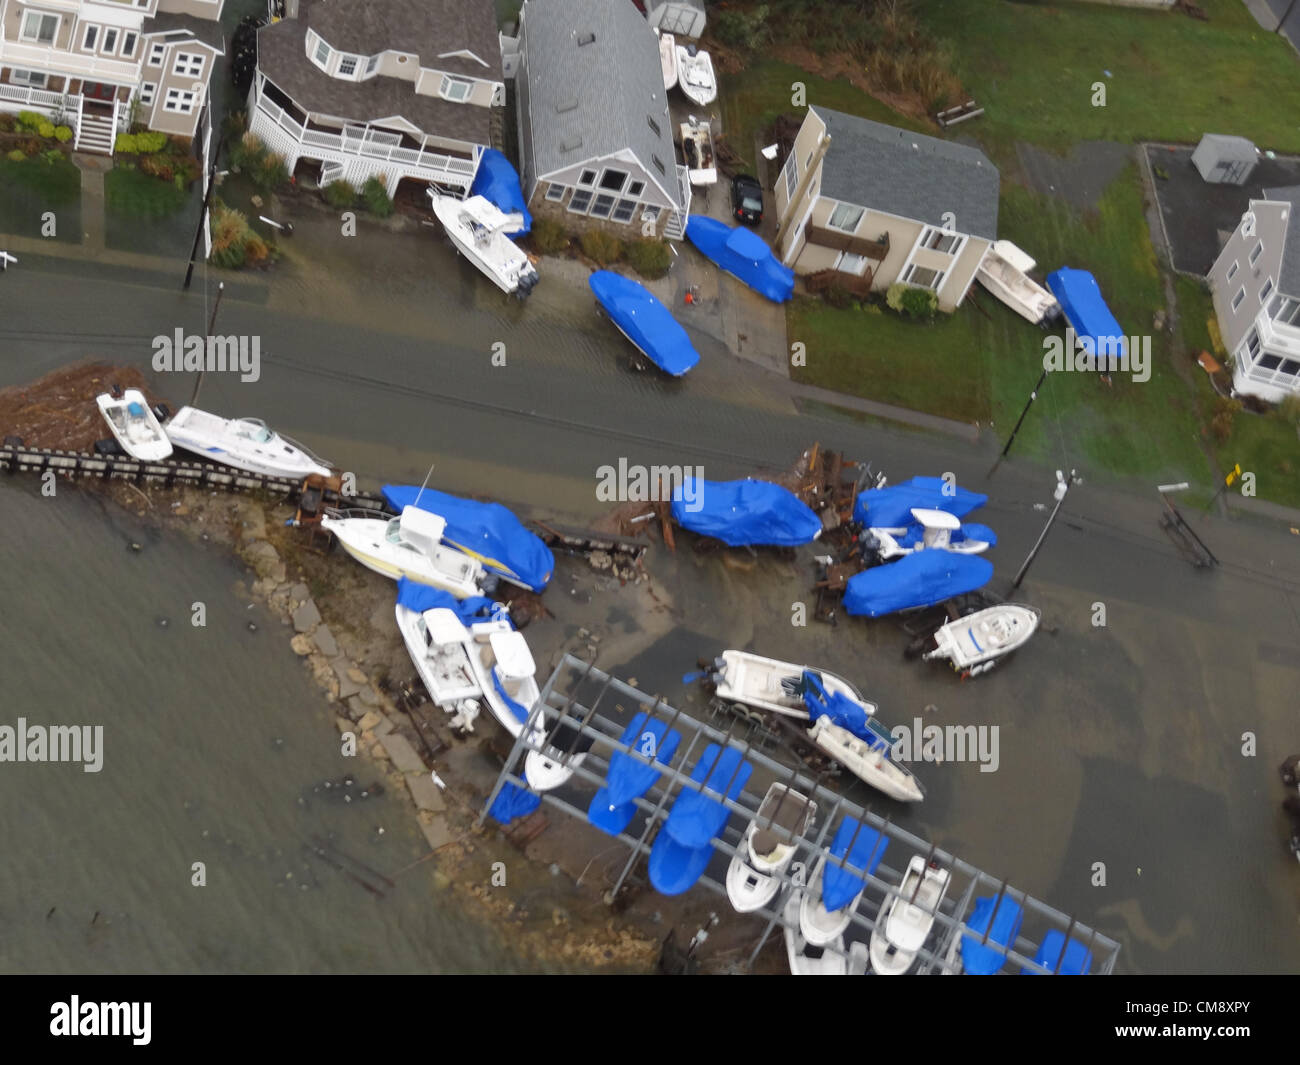 Boats are displaced in Brigantine, N.J., Oct. 30, 2012, after Hurricane Sandy made landfall on the southern New Jersey coastline, USA Oct. 29, 2012. The photo was taken by a Coast Guard crewmember aboard an MH-65 Dolphin helicopter from Coast Guard Air Station Atlantic City during a flooding assessment over flight. Credit: Archive Image/New Jersey National Guard Stock Photo